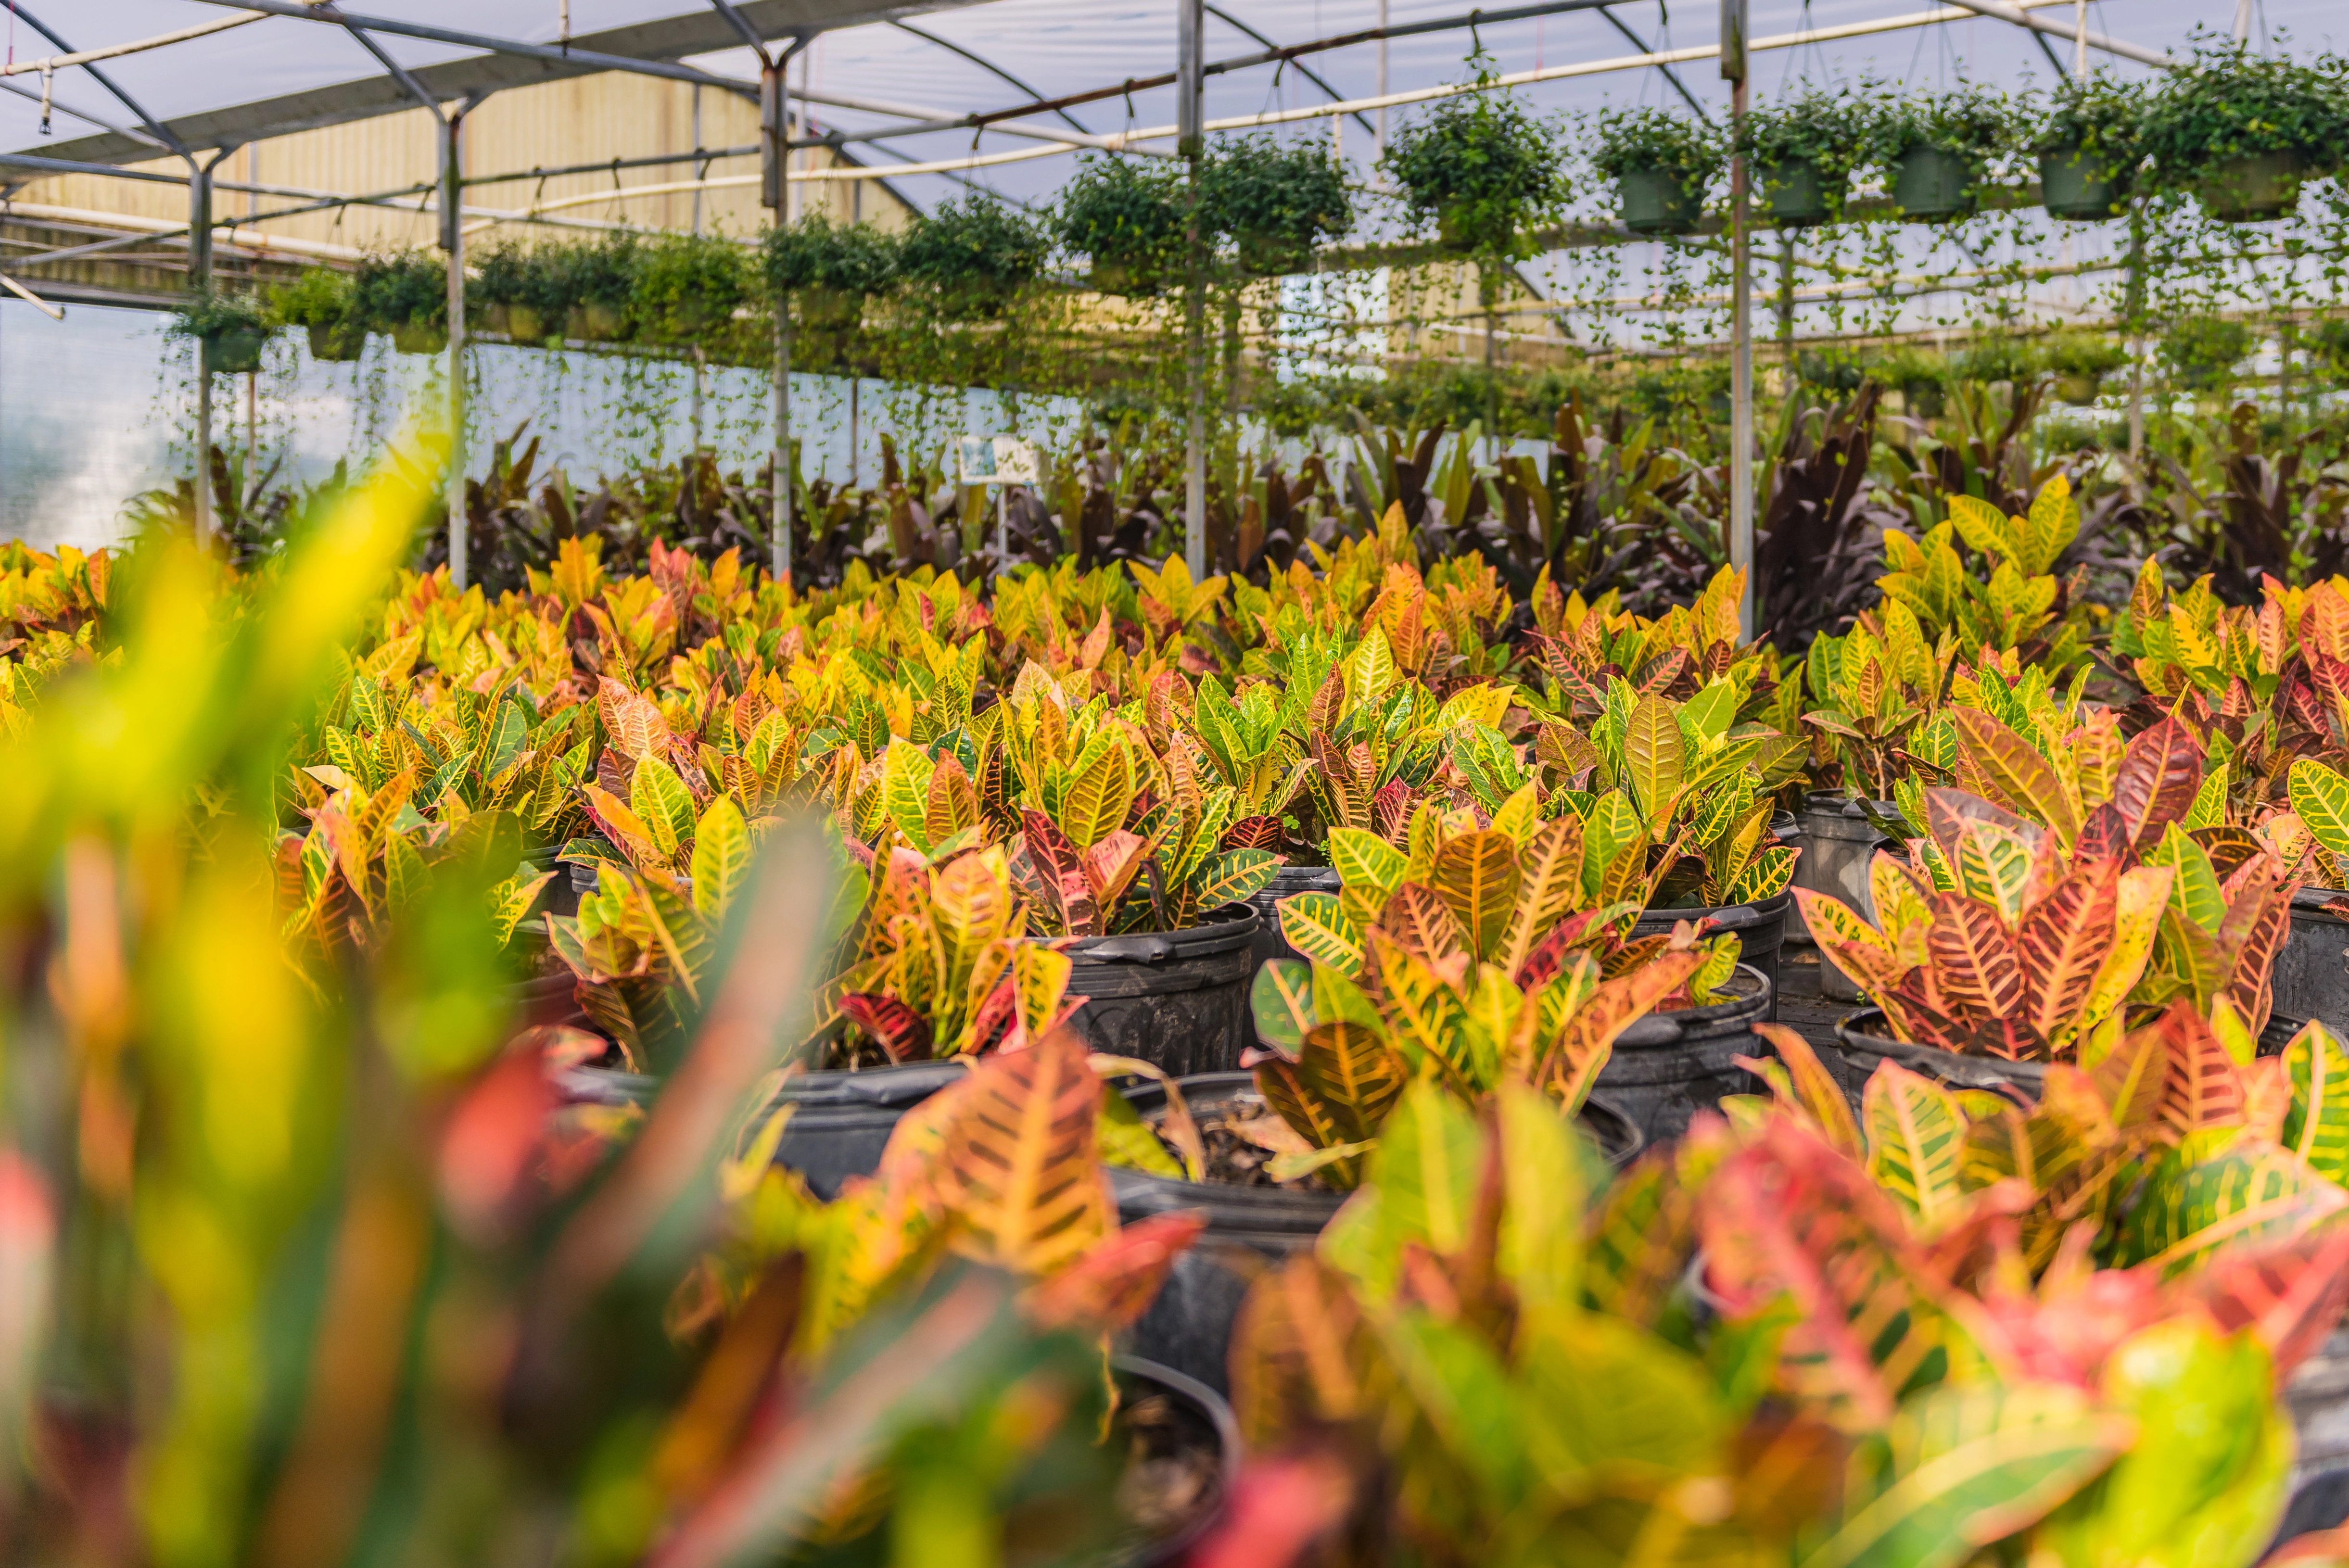 One of our greenhouses at our central Florida nursery with large crotons growing.